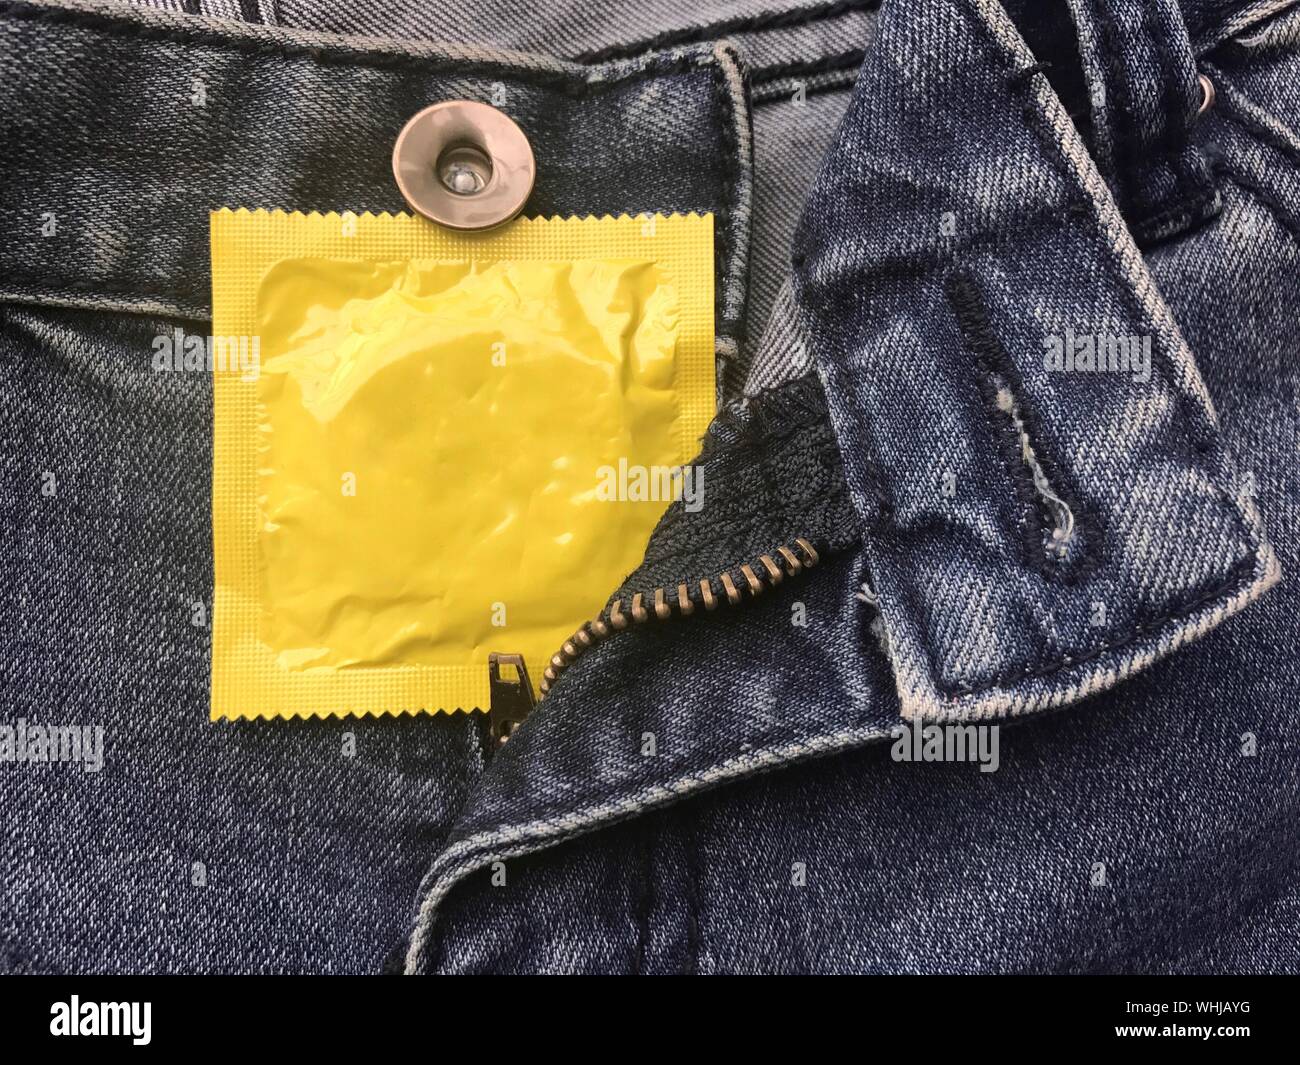 Download Close Up Of Yellow Condom Packet In Jeans Pocket Stock Photo Alamy Yellowimages Mockups